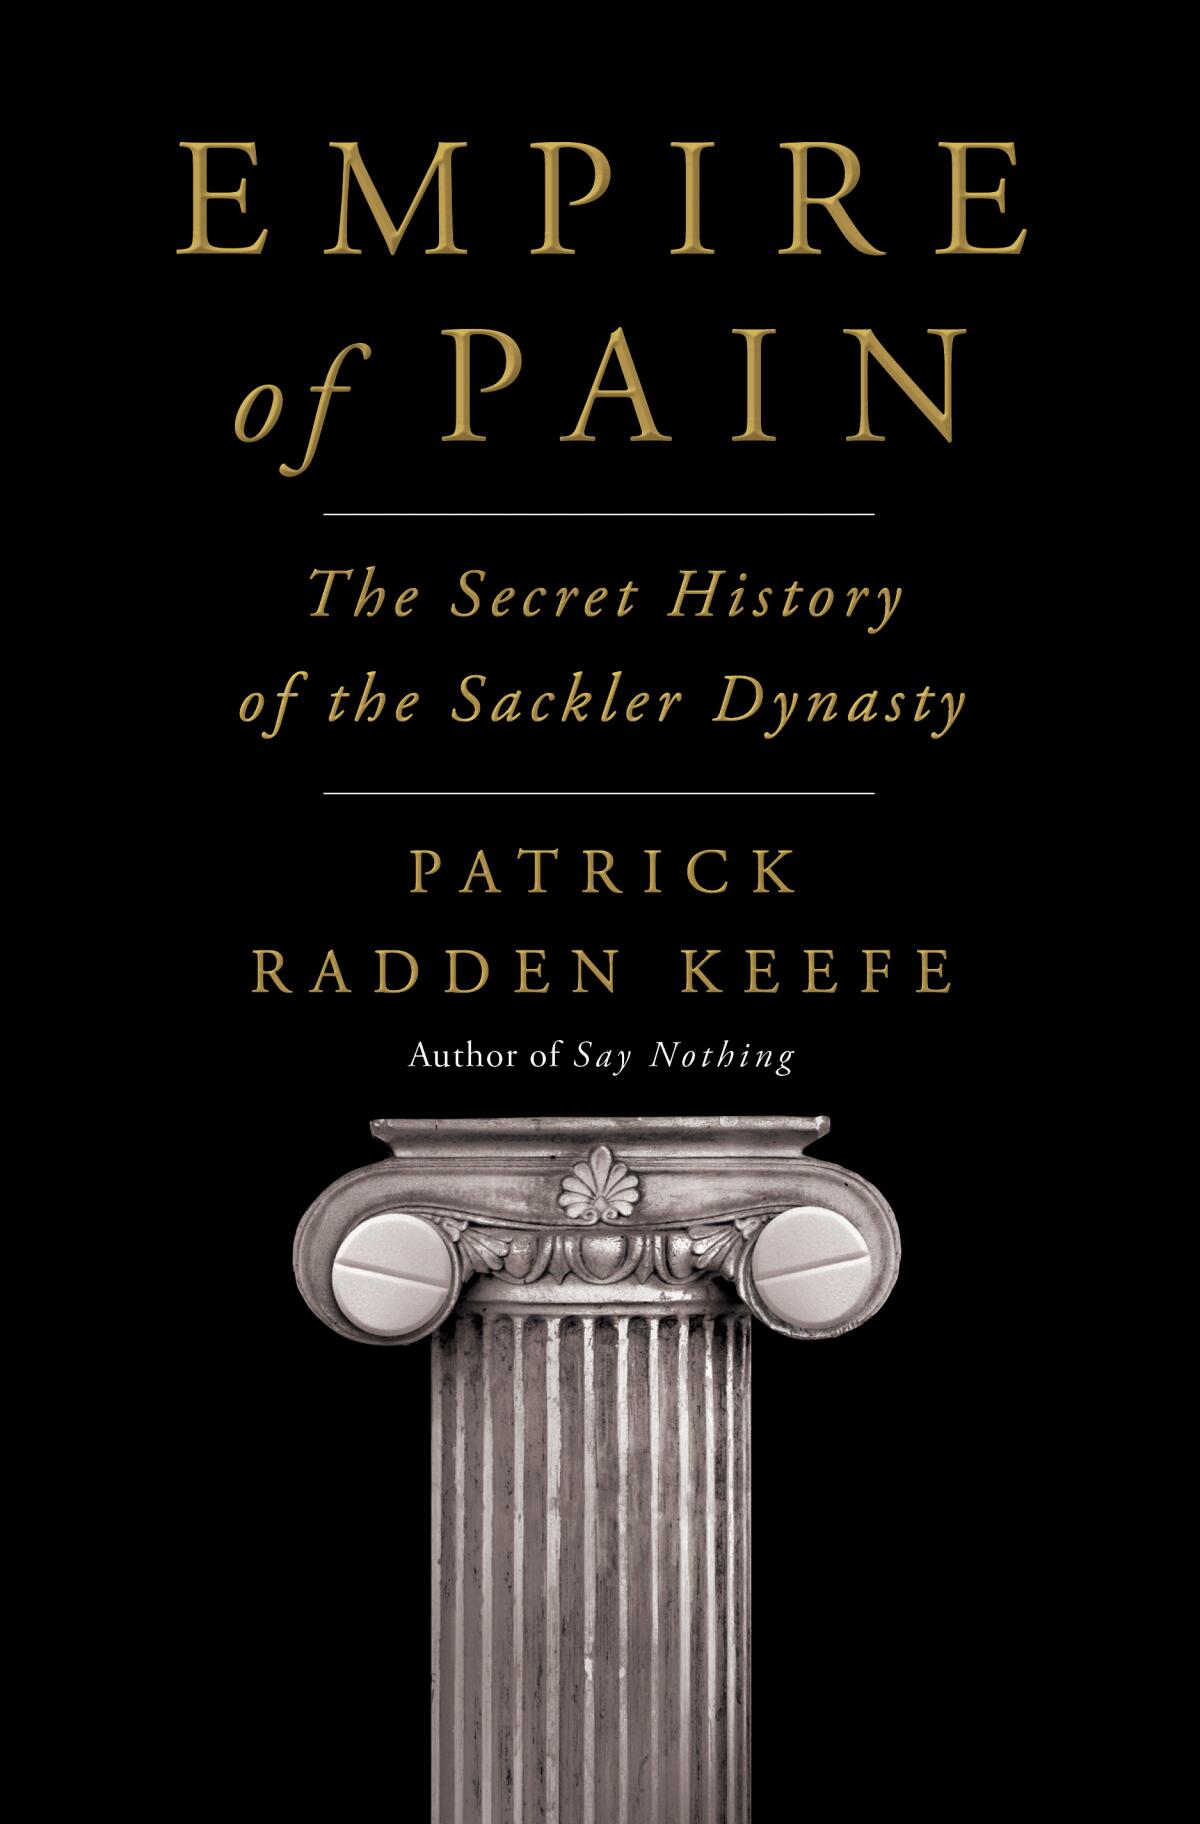 "Empire of Pain," by Patrick Radden Keefe